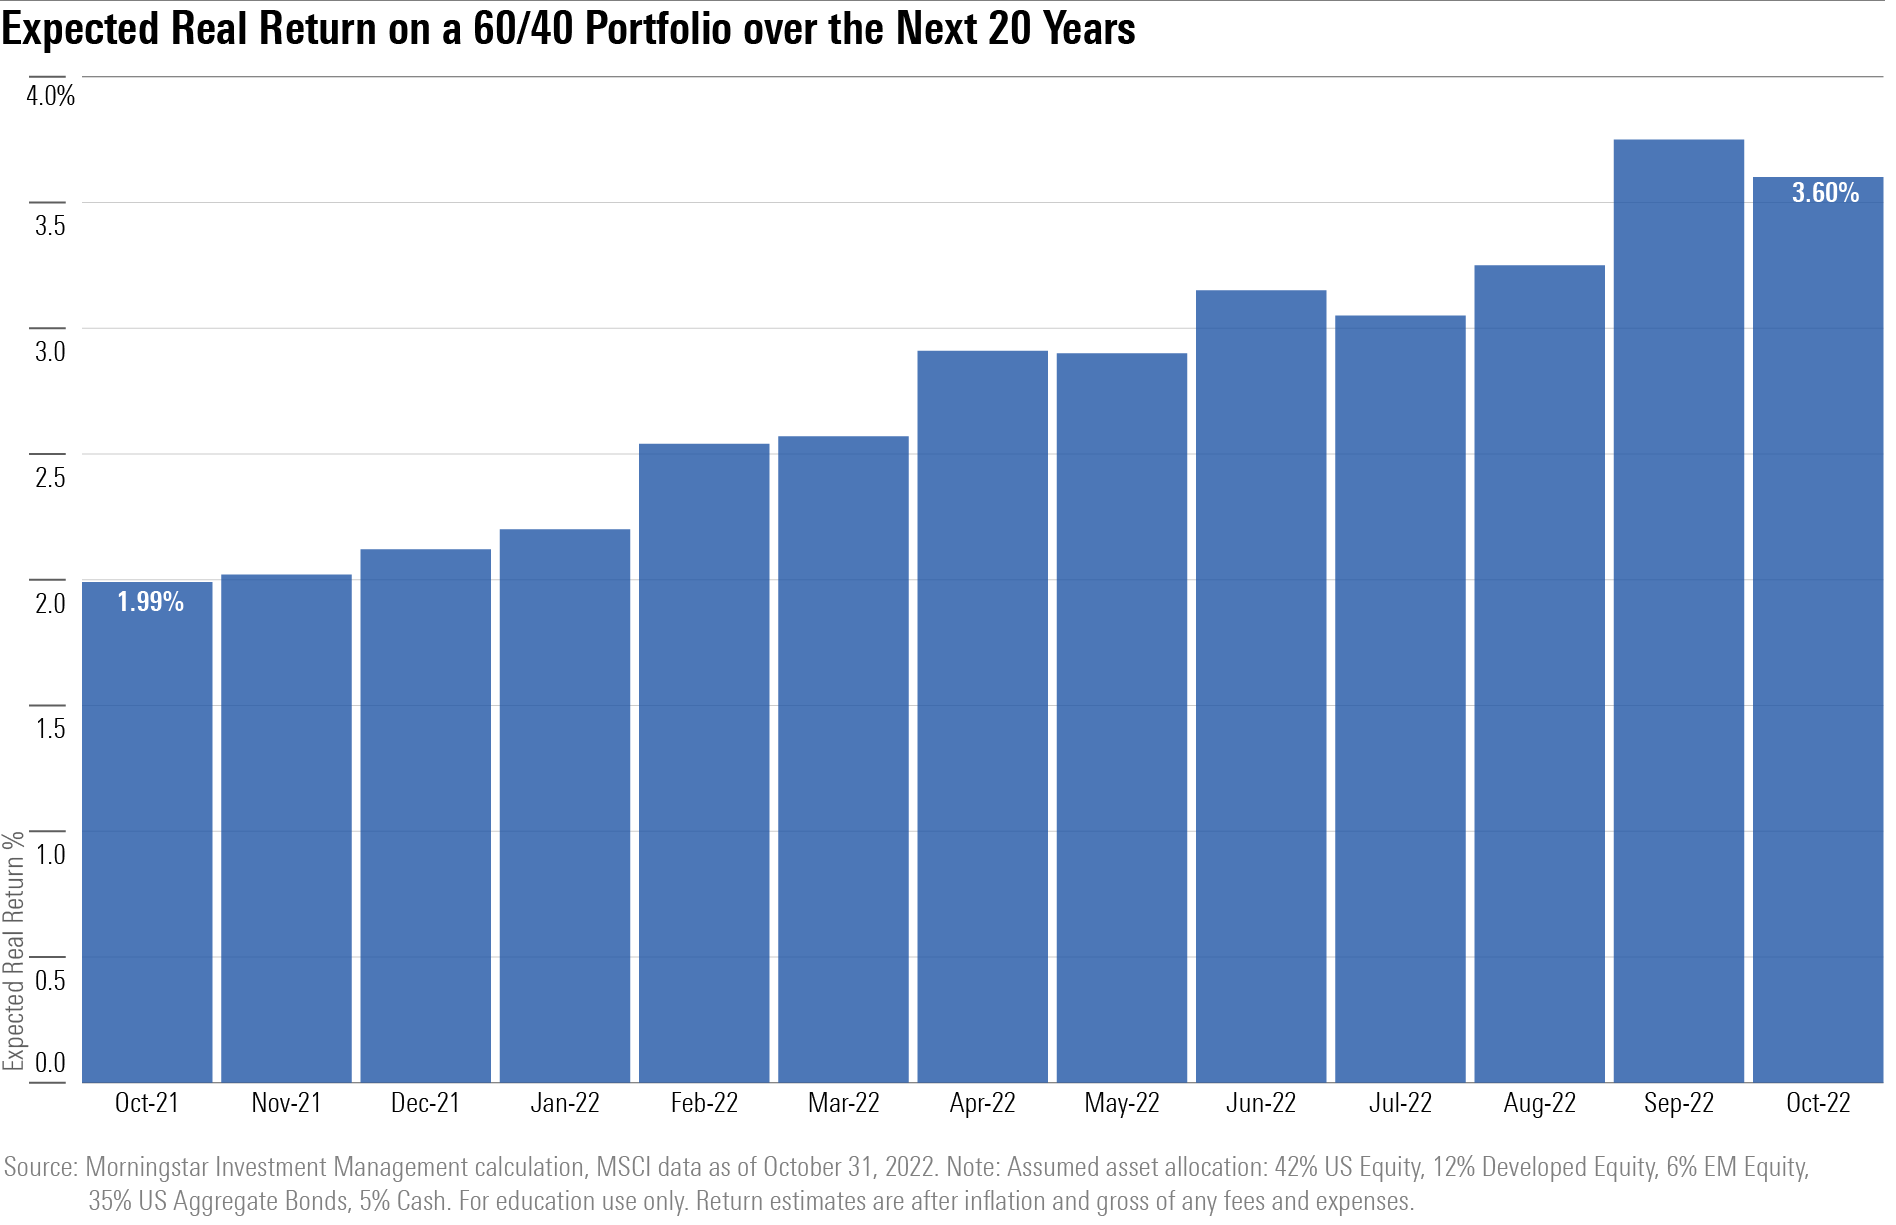 Bar chart showing the expected real returns of a 60/40 portfolio over the next 20 years.